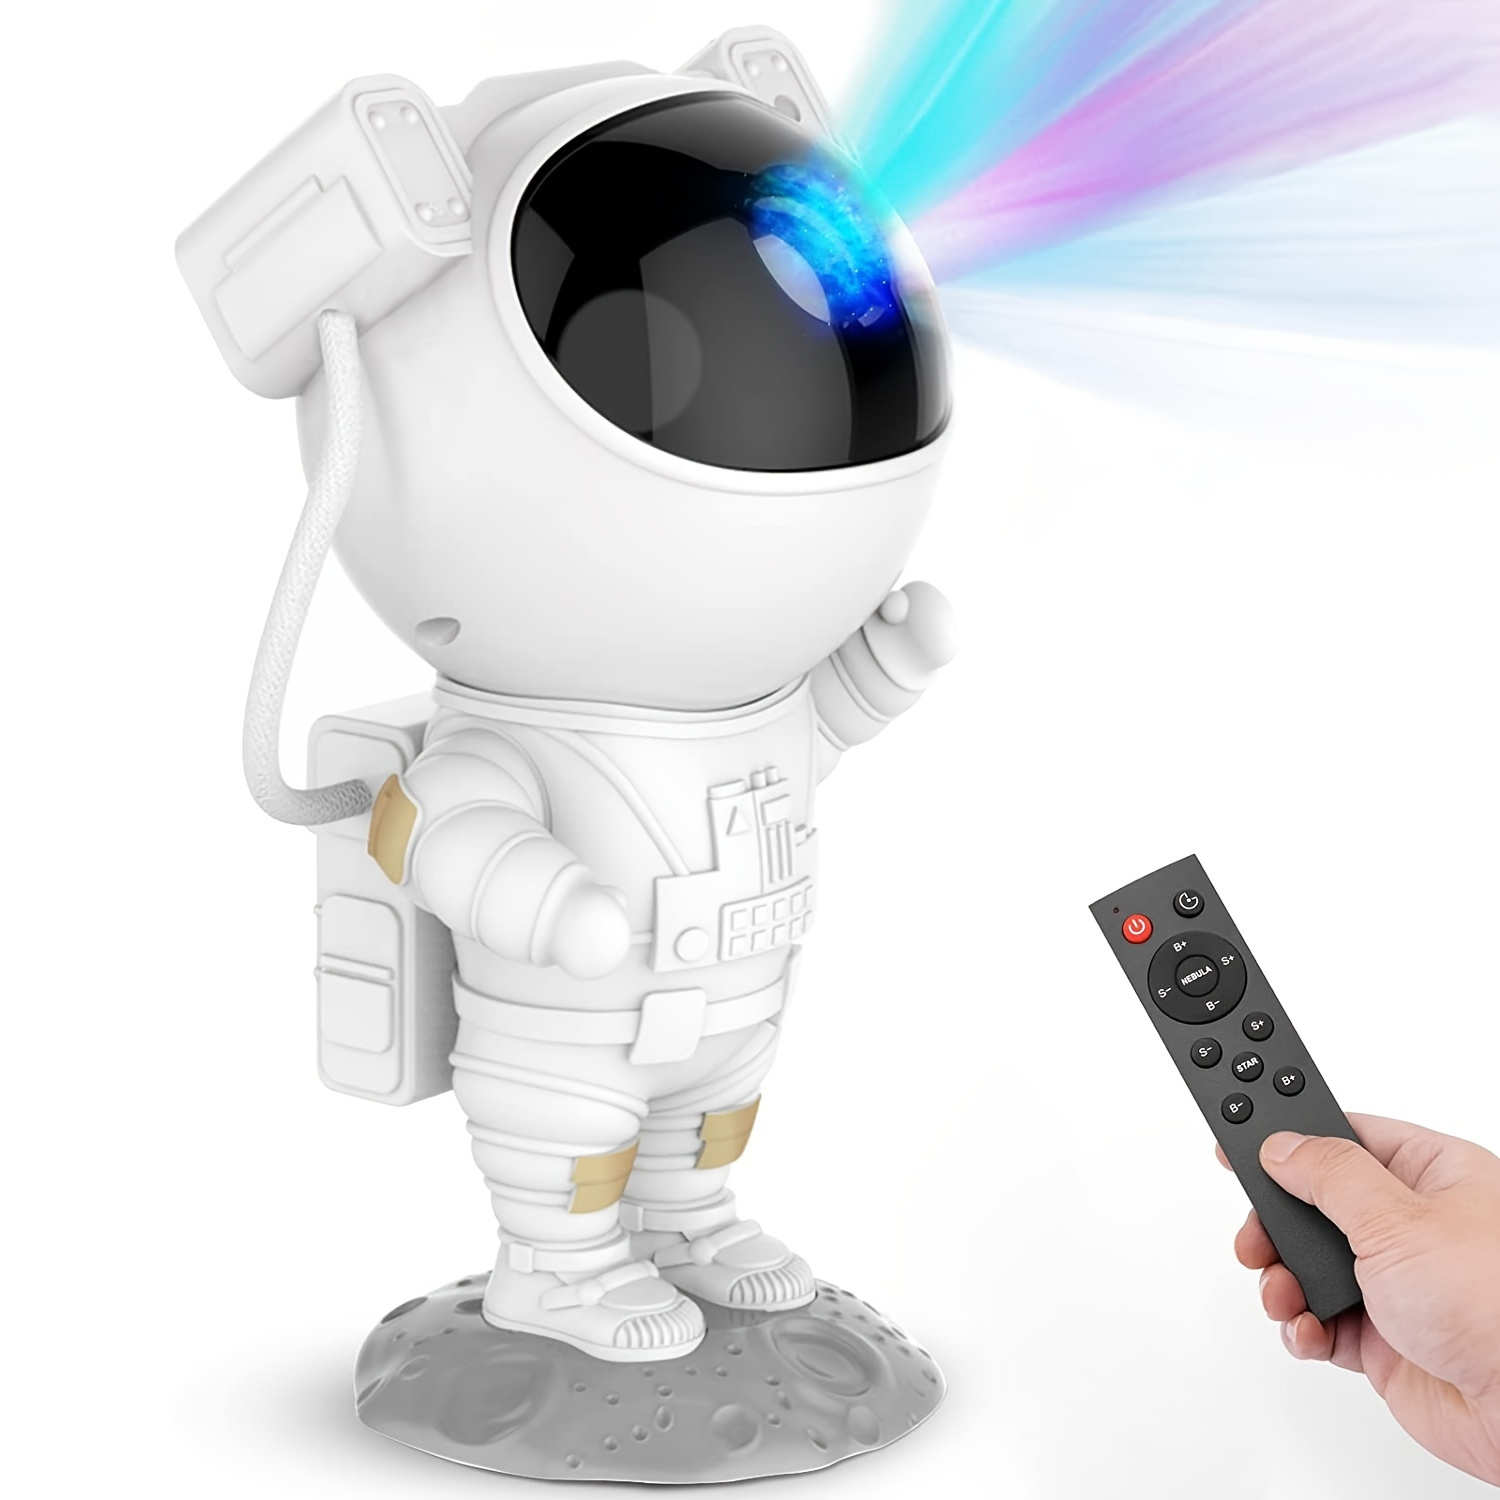  Astronaut Galaxy Light Projector, Space Buddy Projector Night  Light for Bedroom with Remote Control and Timer, Astro Alan Star Ceiling  Projector for Kids Adults : Tools & Home Improvement